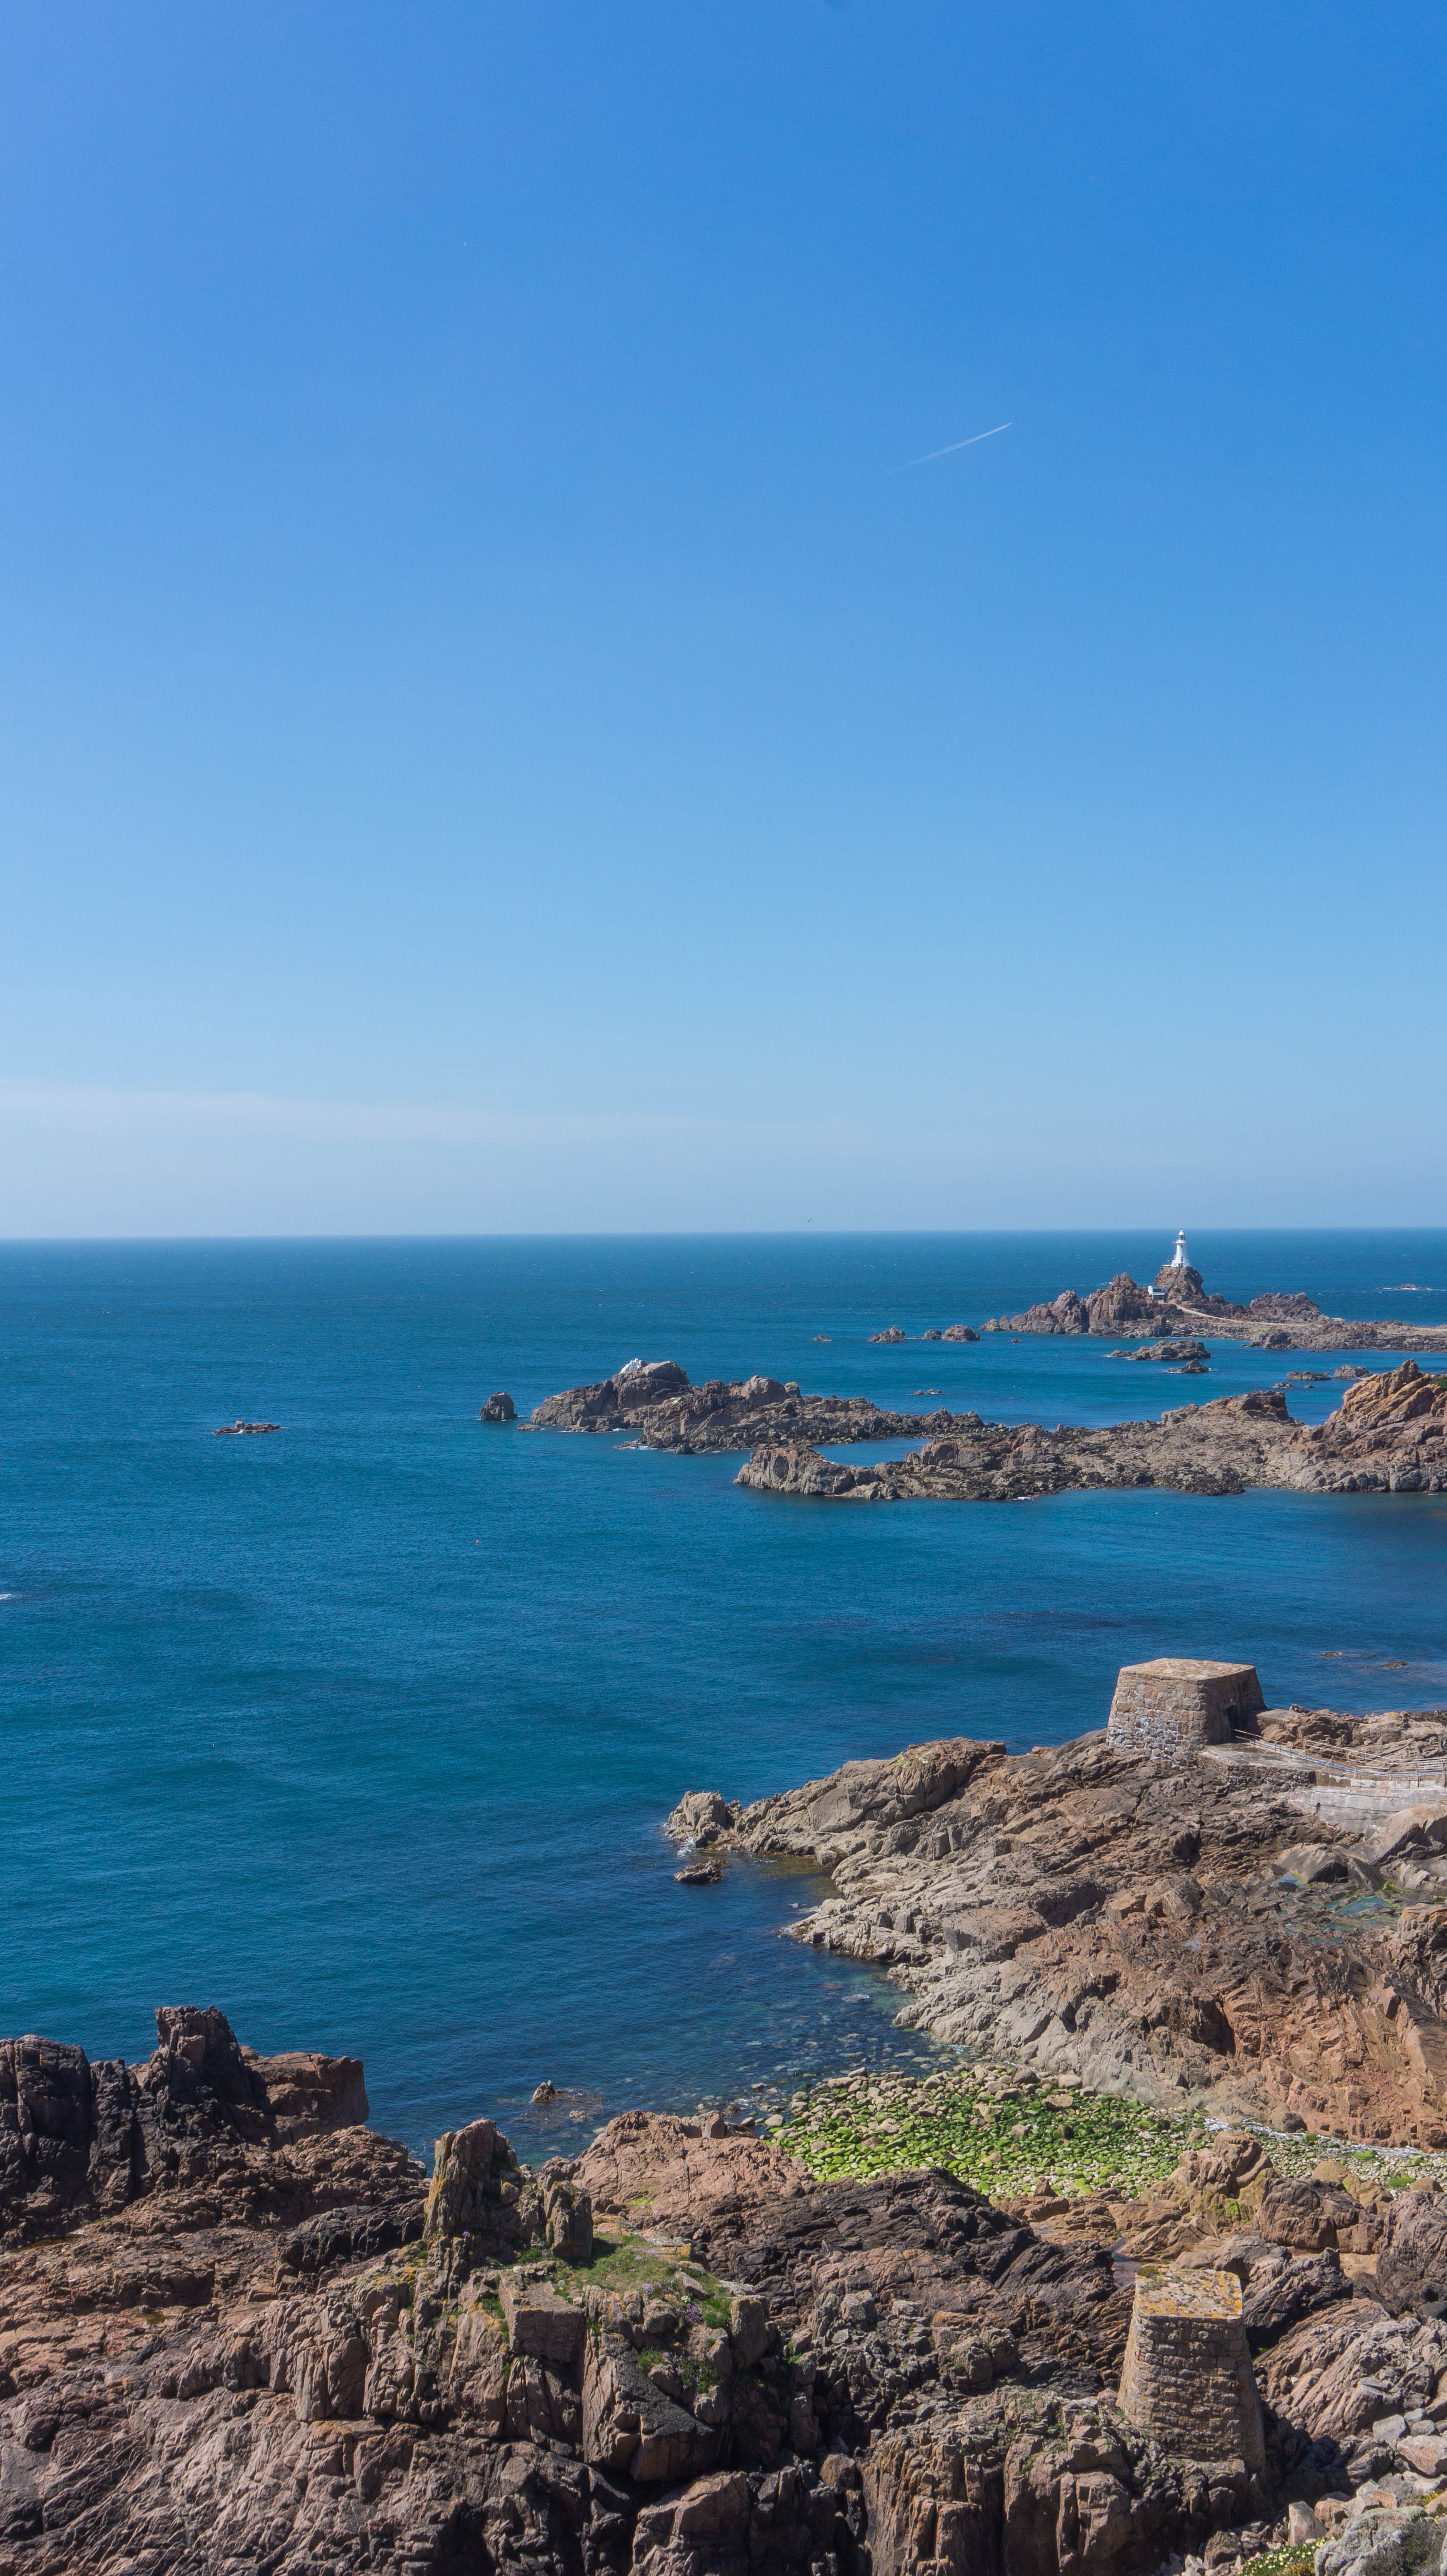 La Corbiere Lighthouse with derelict salt works buildings in foreground.